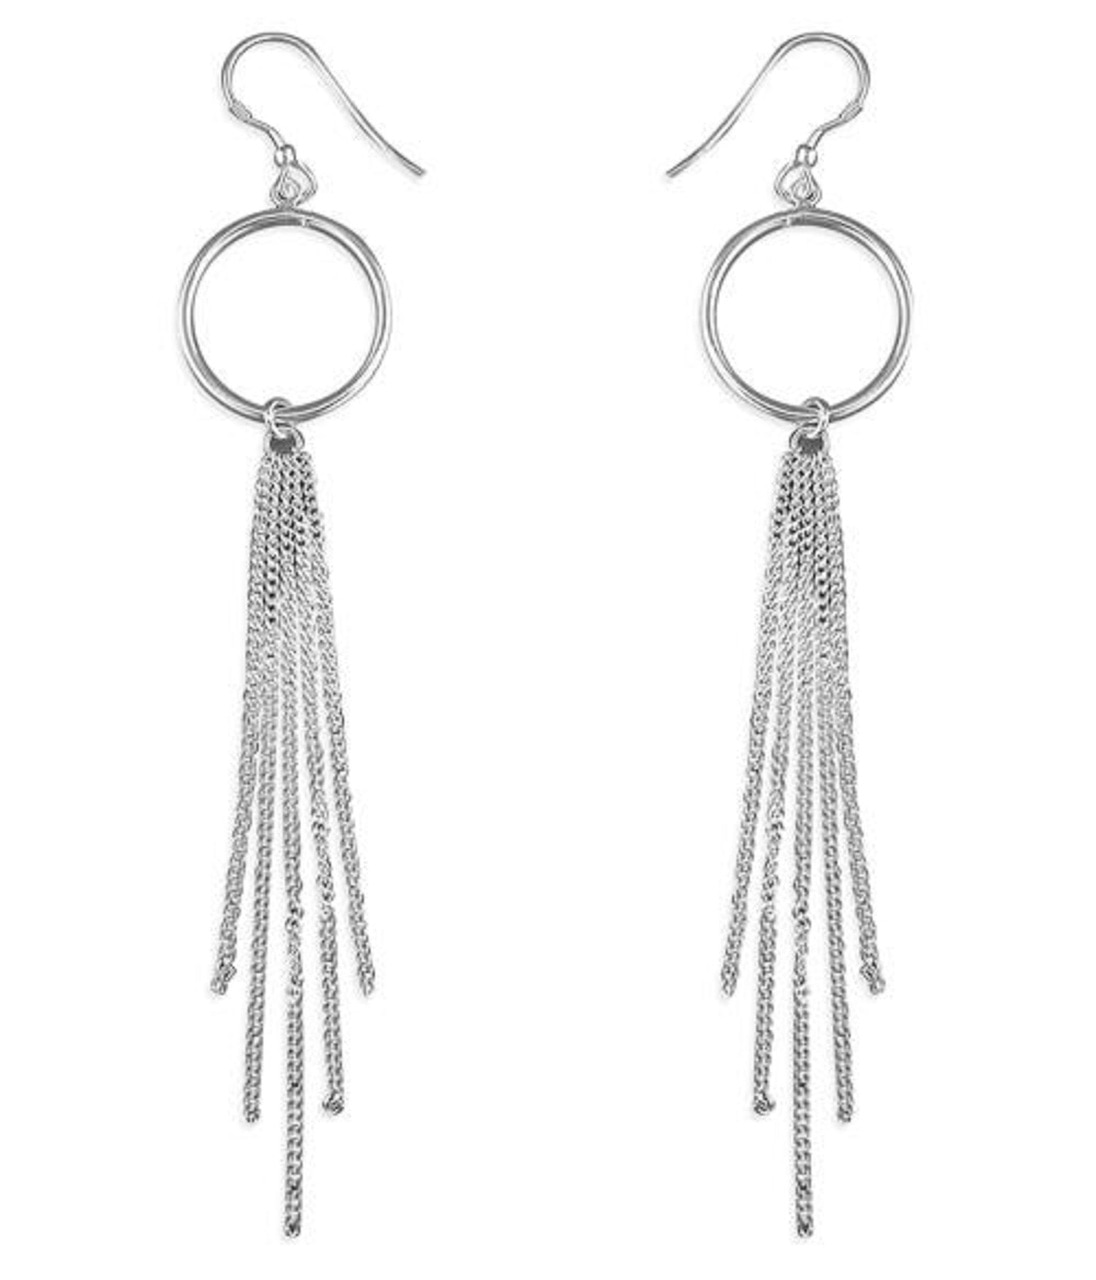 Stand Out Long Silver Earrings,